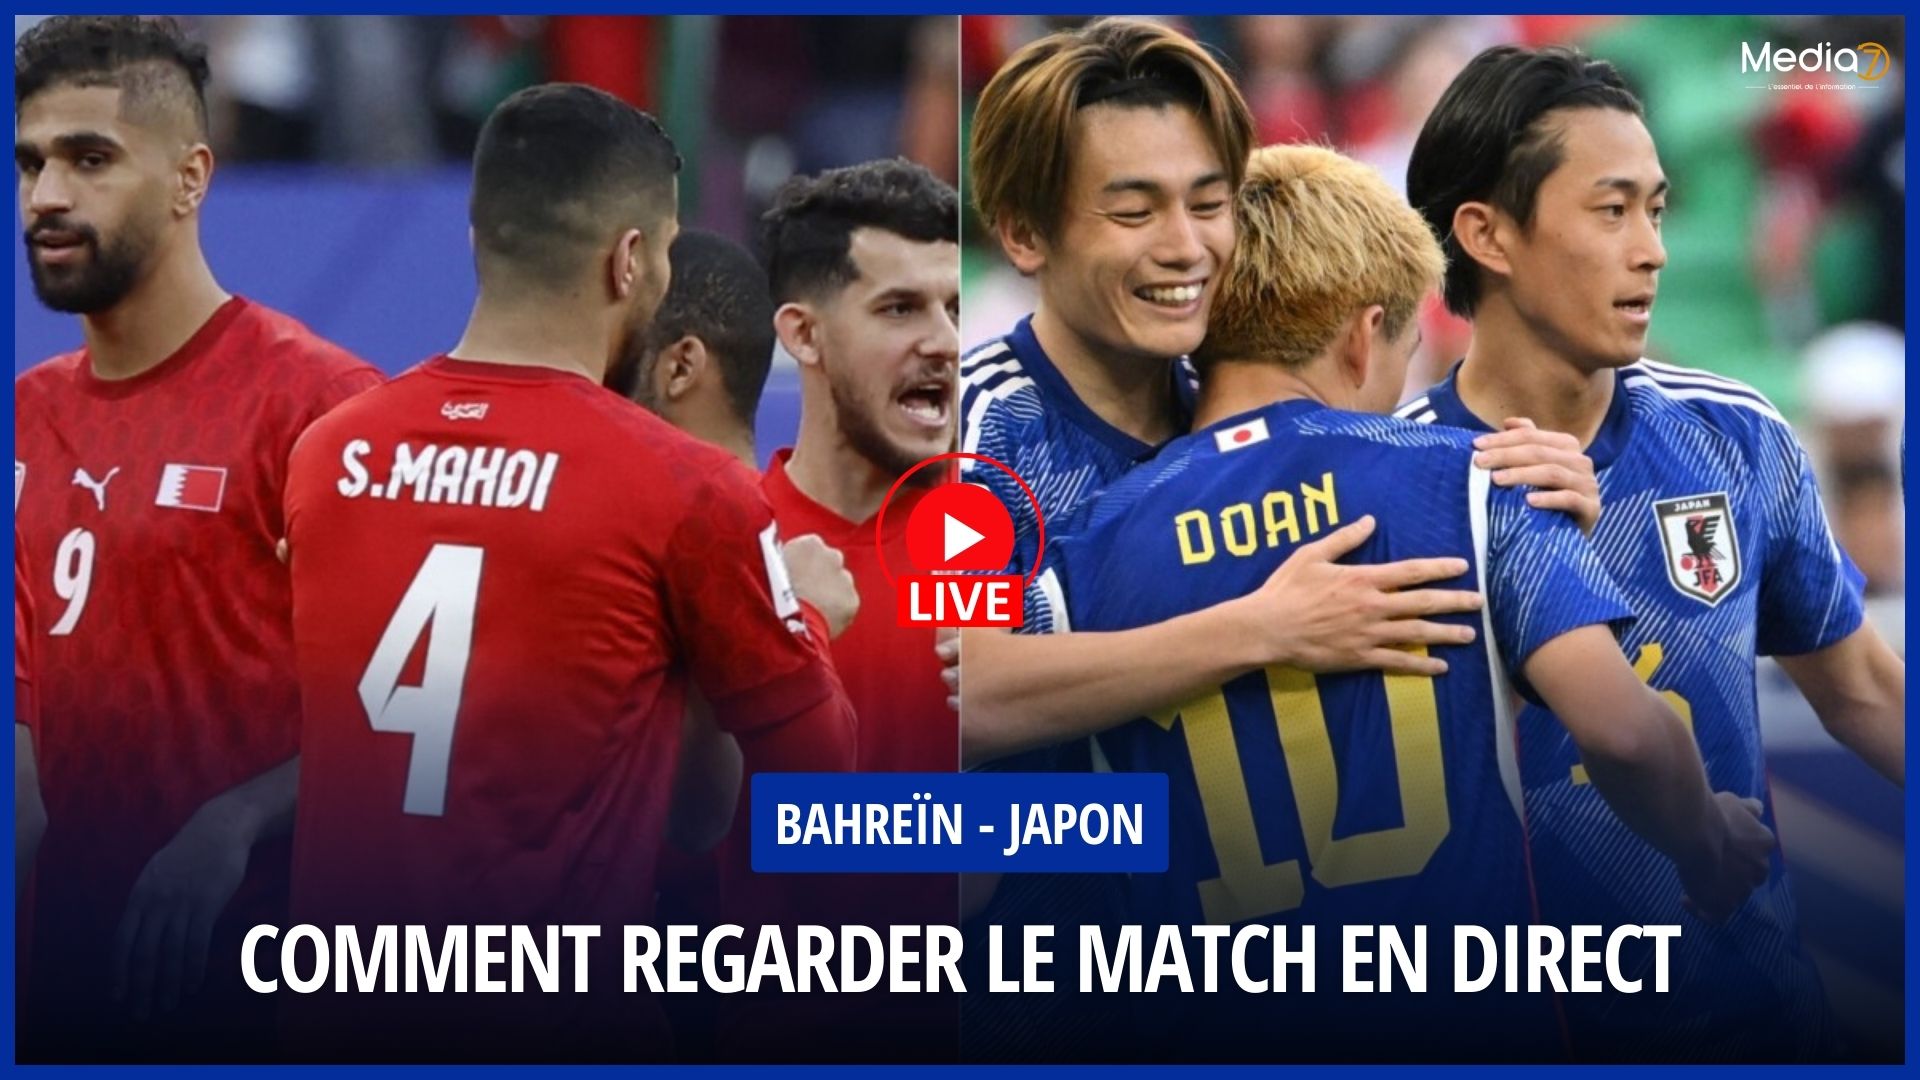 How to Watch the Bahrain – Japan Match Live? - Media7